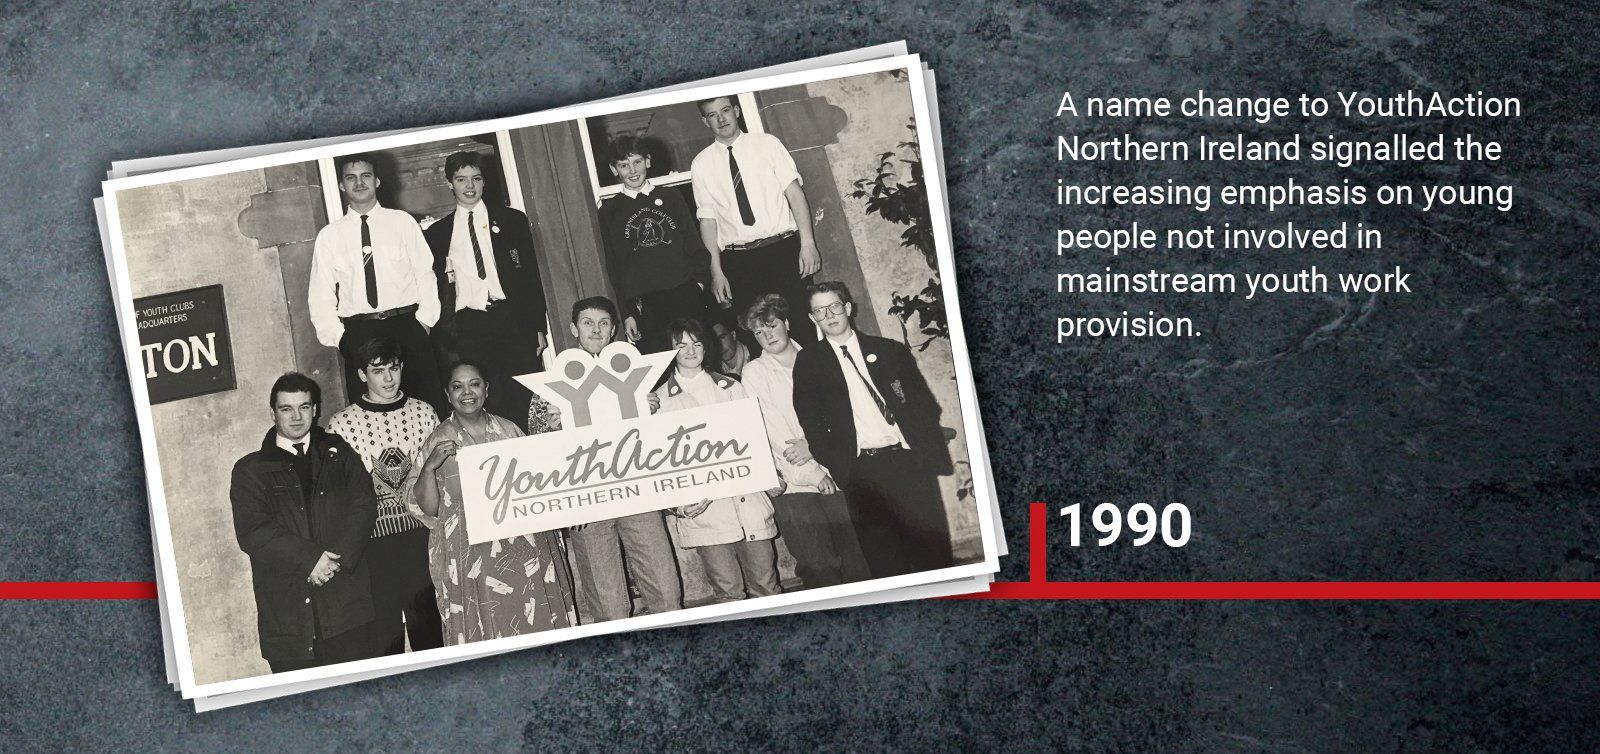 1990  A name change to YouthAction Northern Ireland signalled the increasing emphasis on young people not involved in mainstream youth work provision.